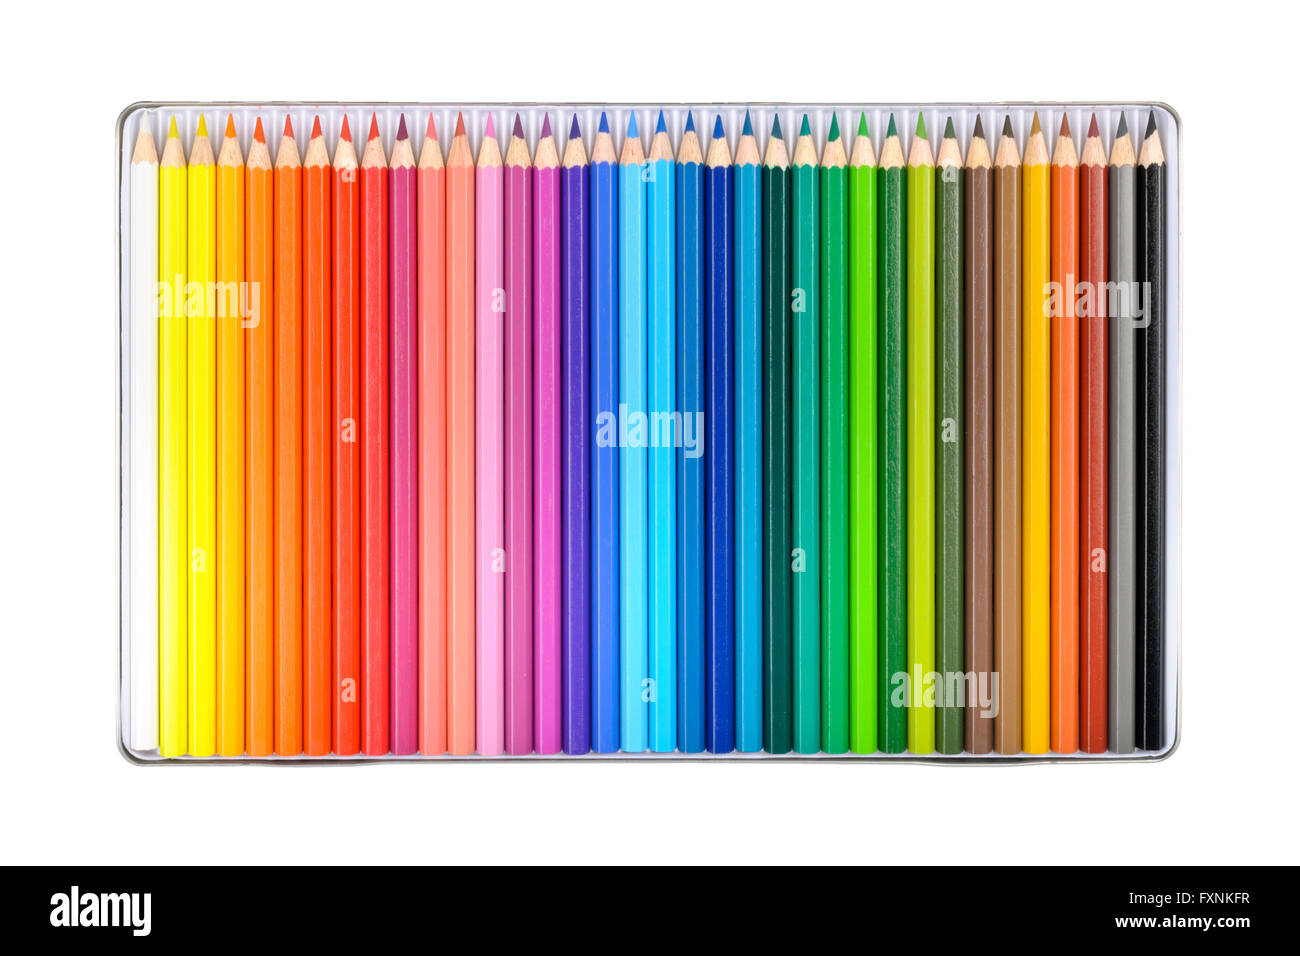 Bright Markers And Crayons In Holders Isolated On White Stock Photo,  Picture and Royalty Free Image. Image 10817733.